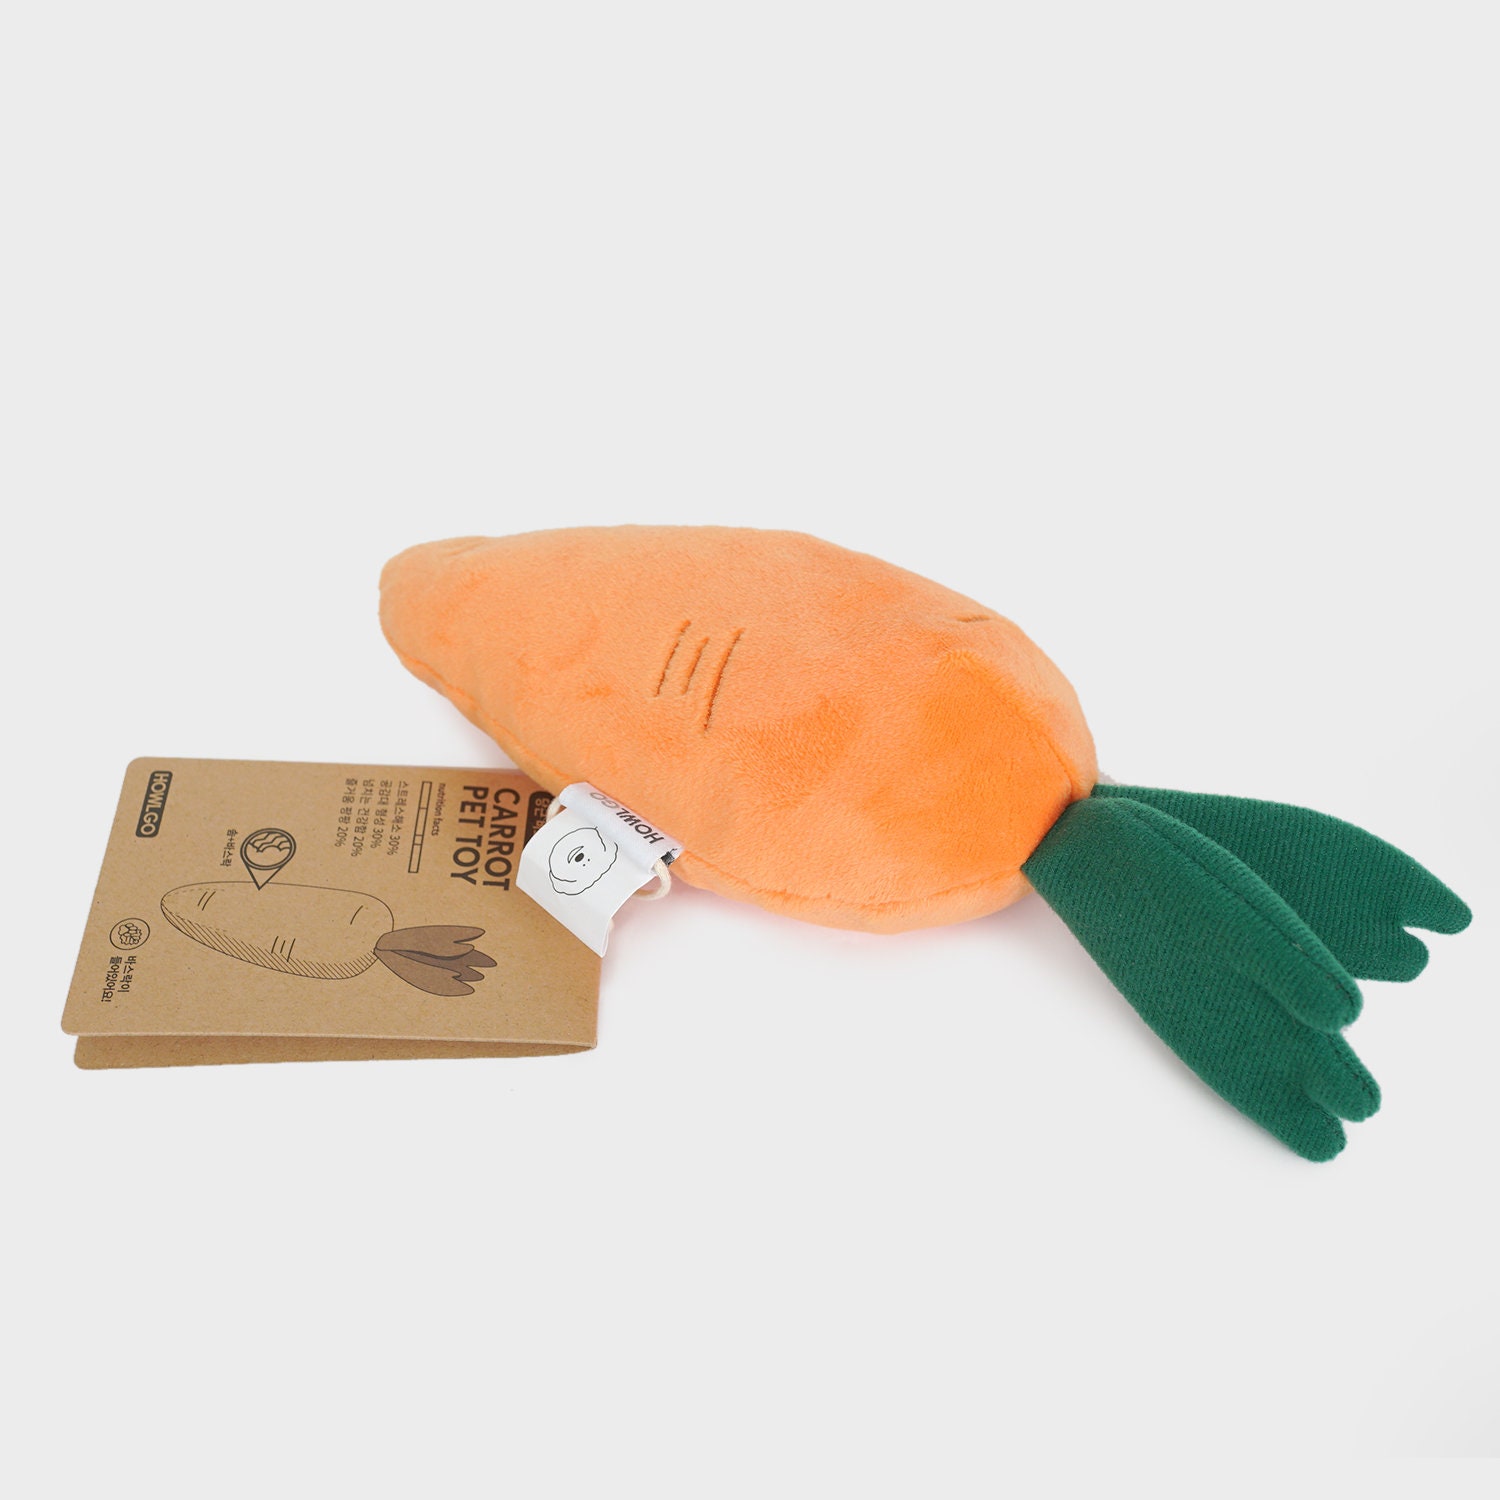 Carrot Field Pet Plushie Toy – Waggy Tails